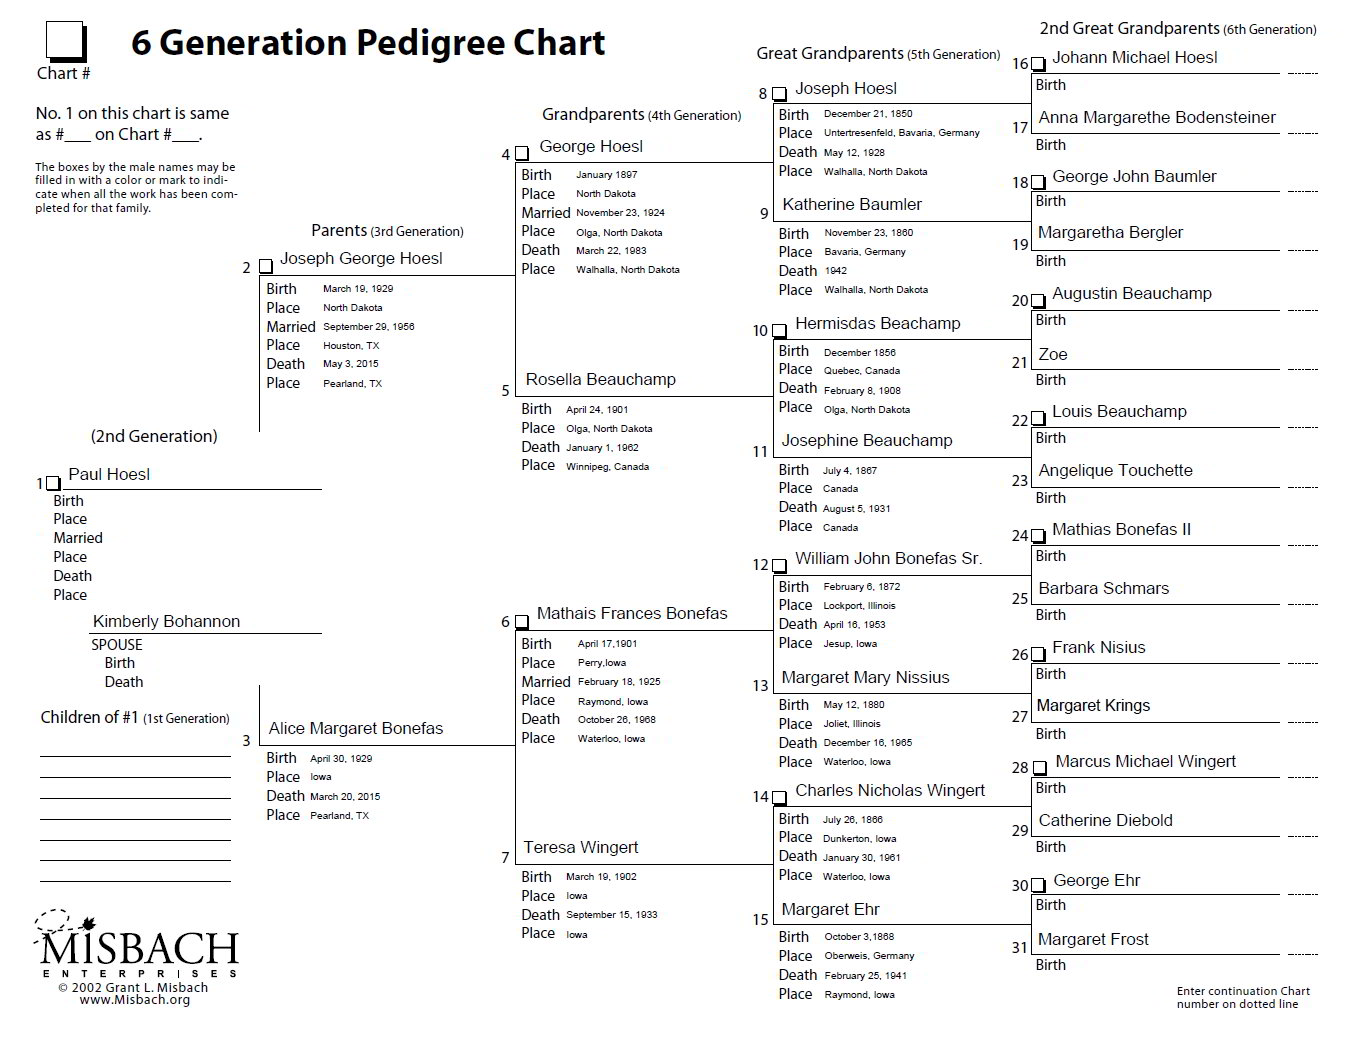 Genealogy Log Book: Track and Record Your Research Into Your Family History  Ancestry Tree Organizer, Family Pedigree Chart, Genealogy  Charts To